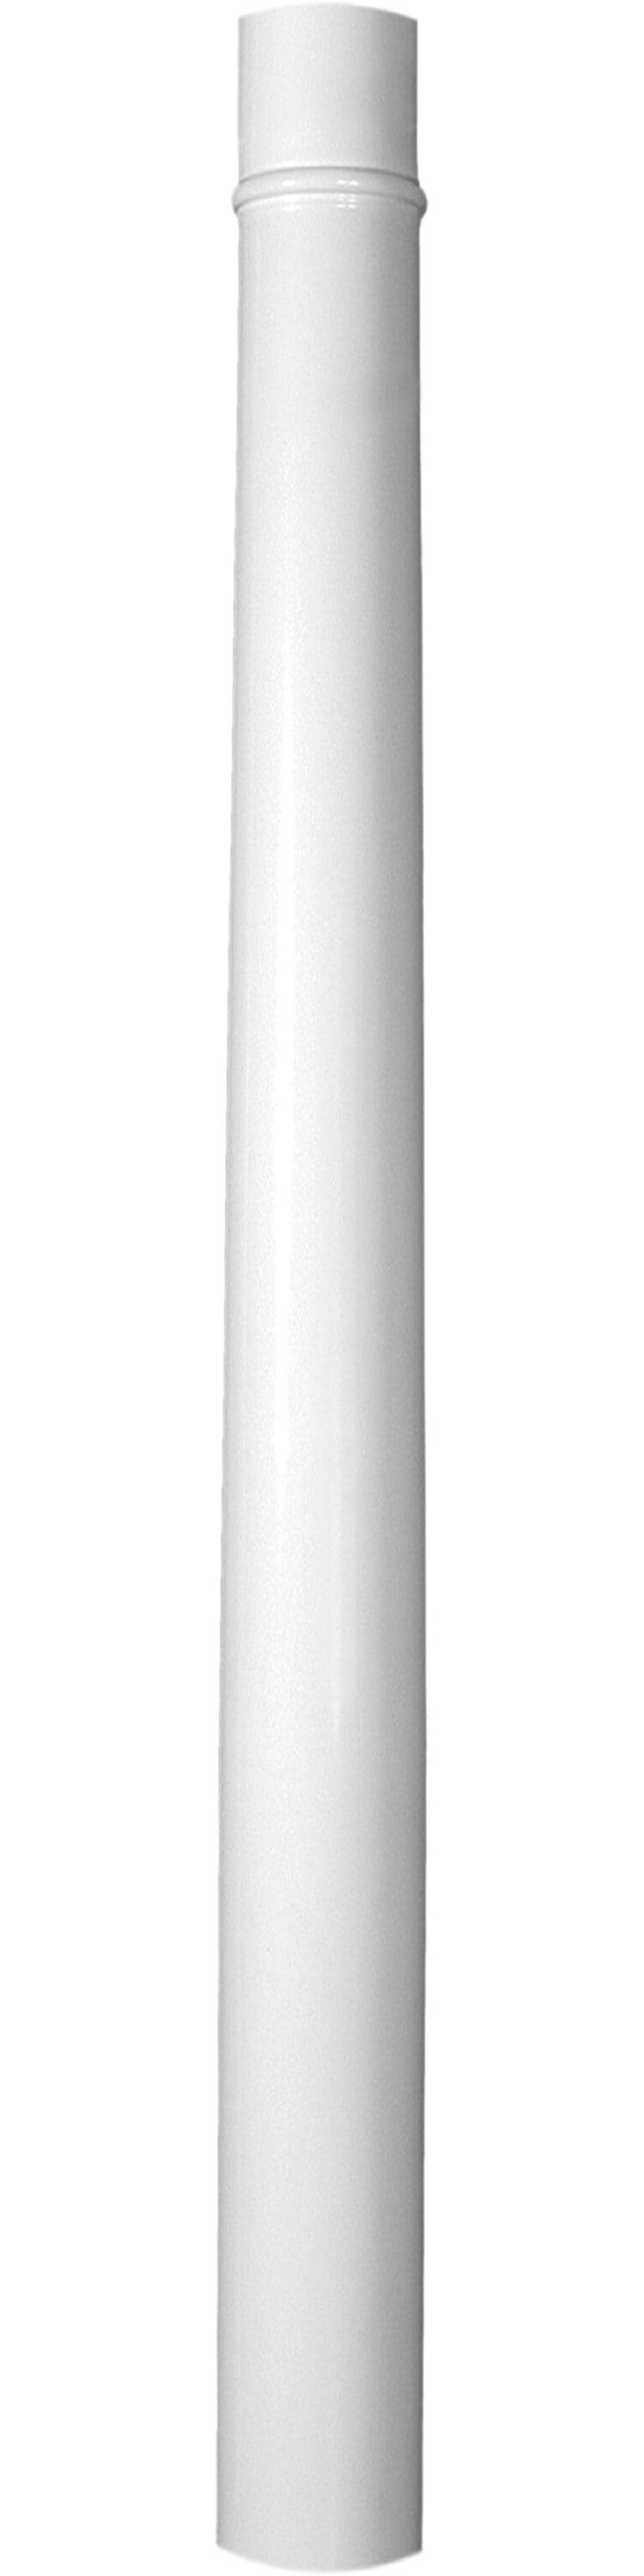  Hudson Comfort Basement Pole Wrap - Garage Pole Padding with  Anti Slip Fabric - Strong Velcro for A Tight Wrap - Round Column Wrap 10mm  Foam - 12x24 Inches (4 Pack) 